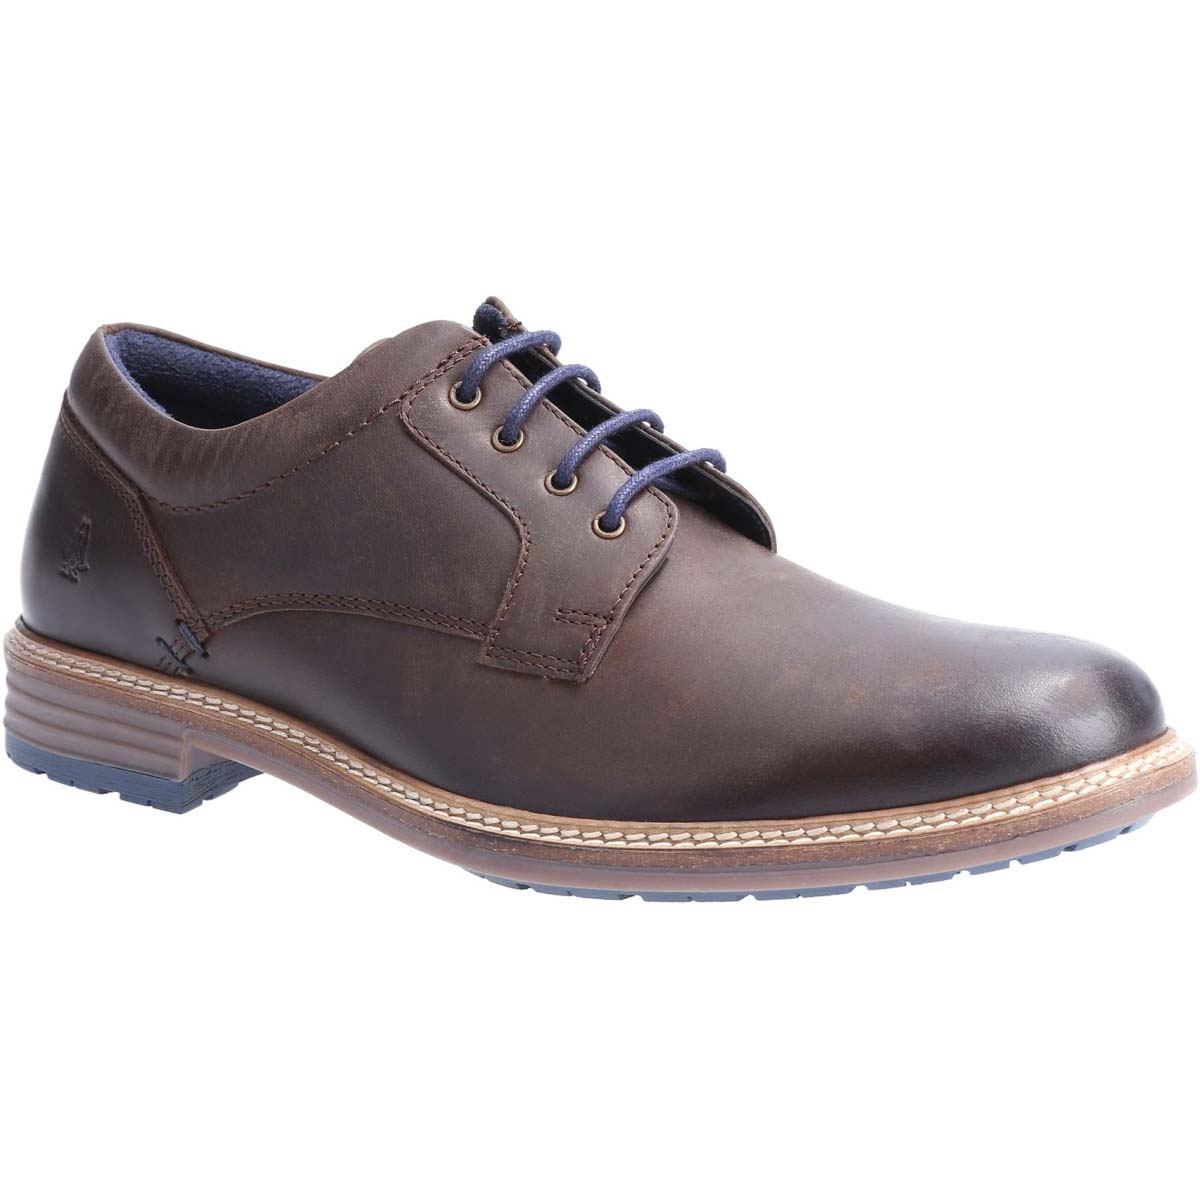 Hush Puppies Julian Lace Up Brown Mens formal shoes 35650-66503 in a Plain Leather in Size 10